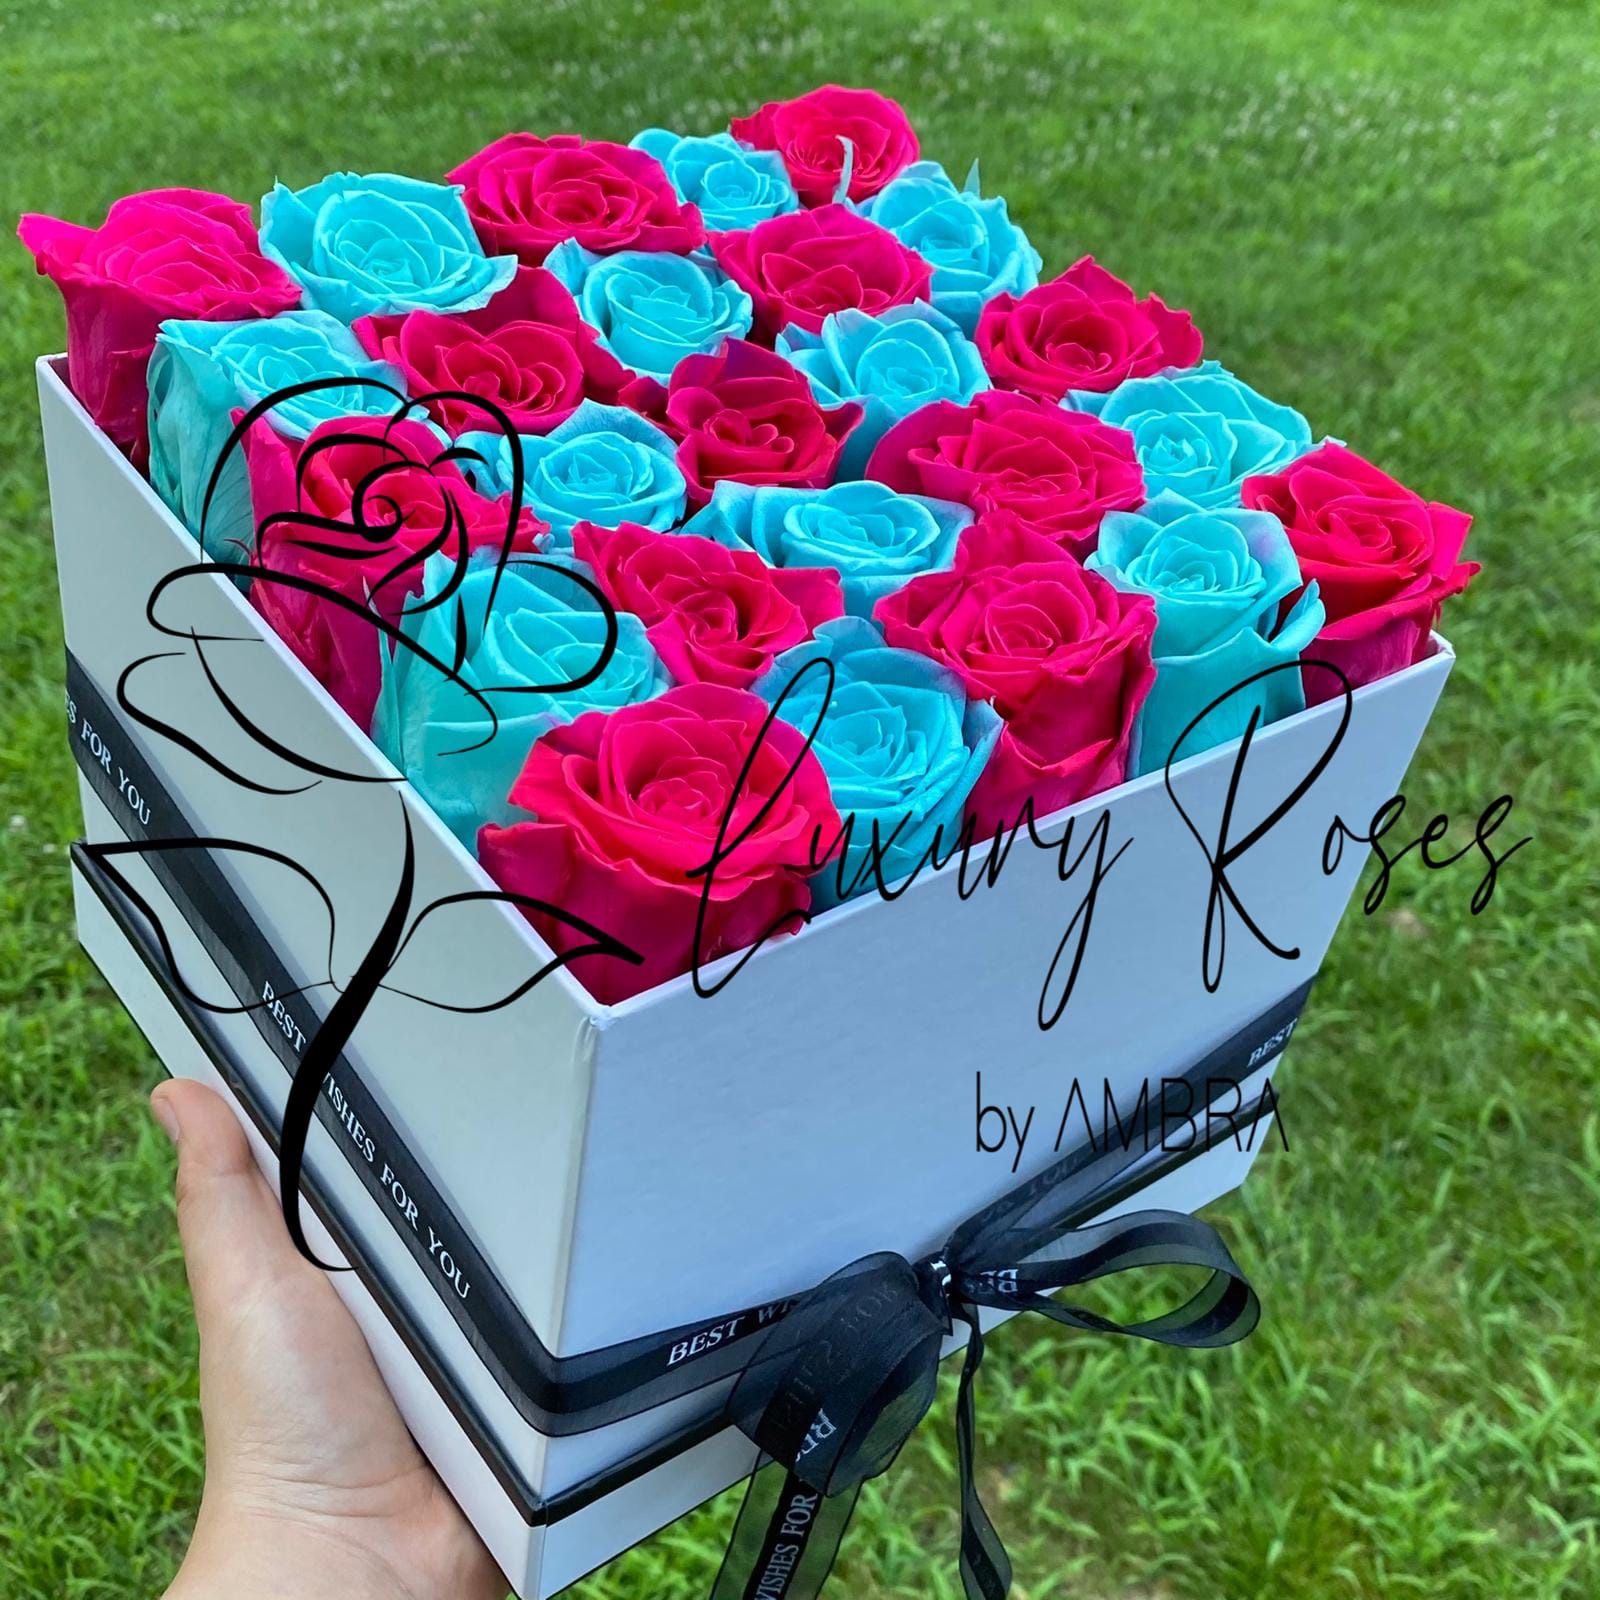 Eternal Box Roses Real Preserved Flowers Long Lasting Bouquet Anniversary Bday Gift Luxury Handmade immortal roses 